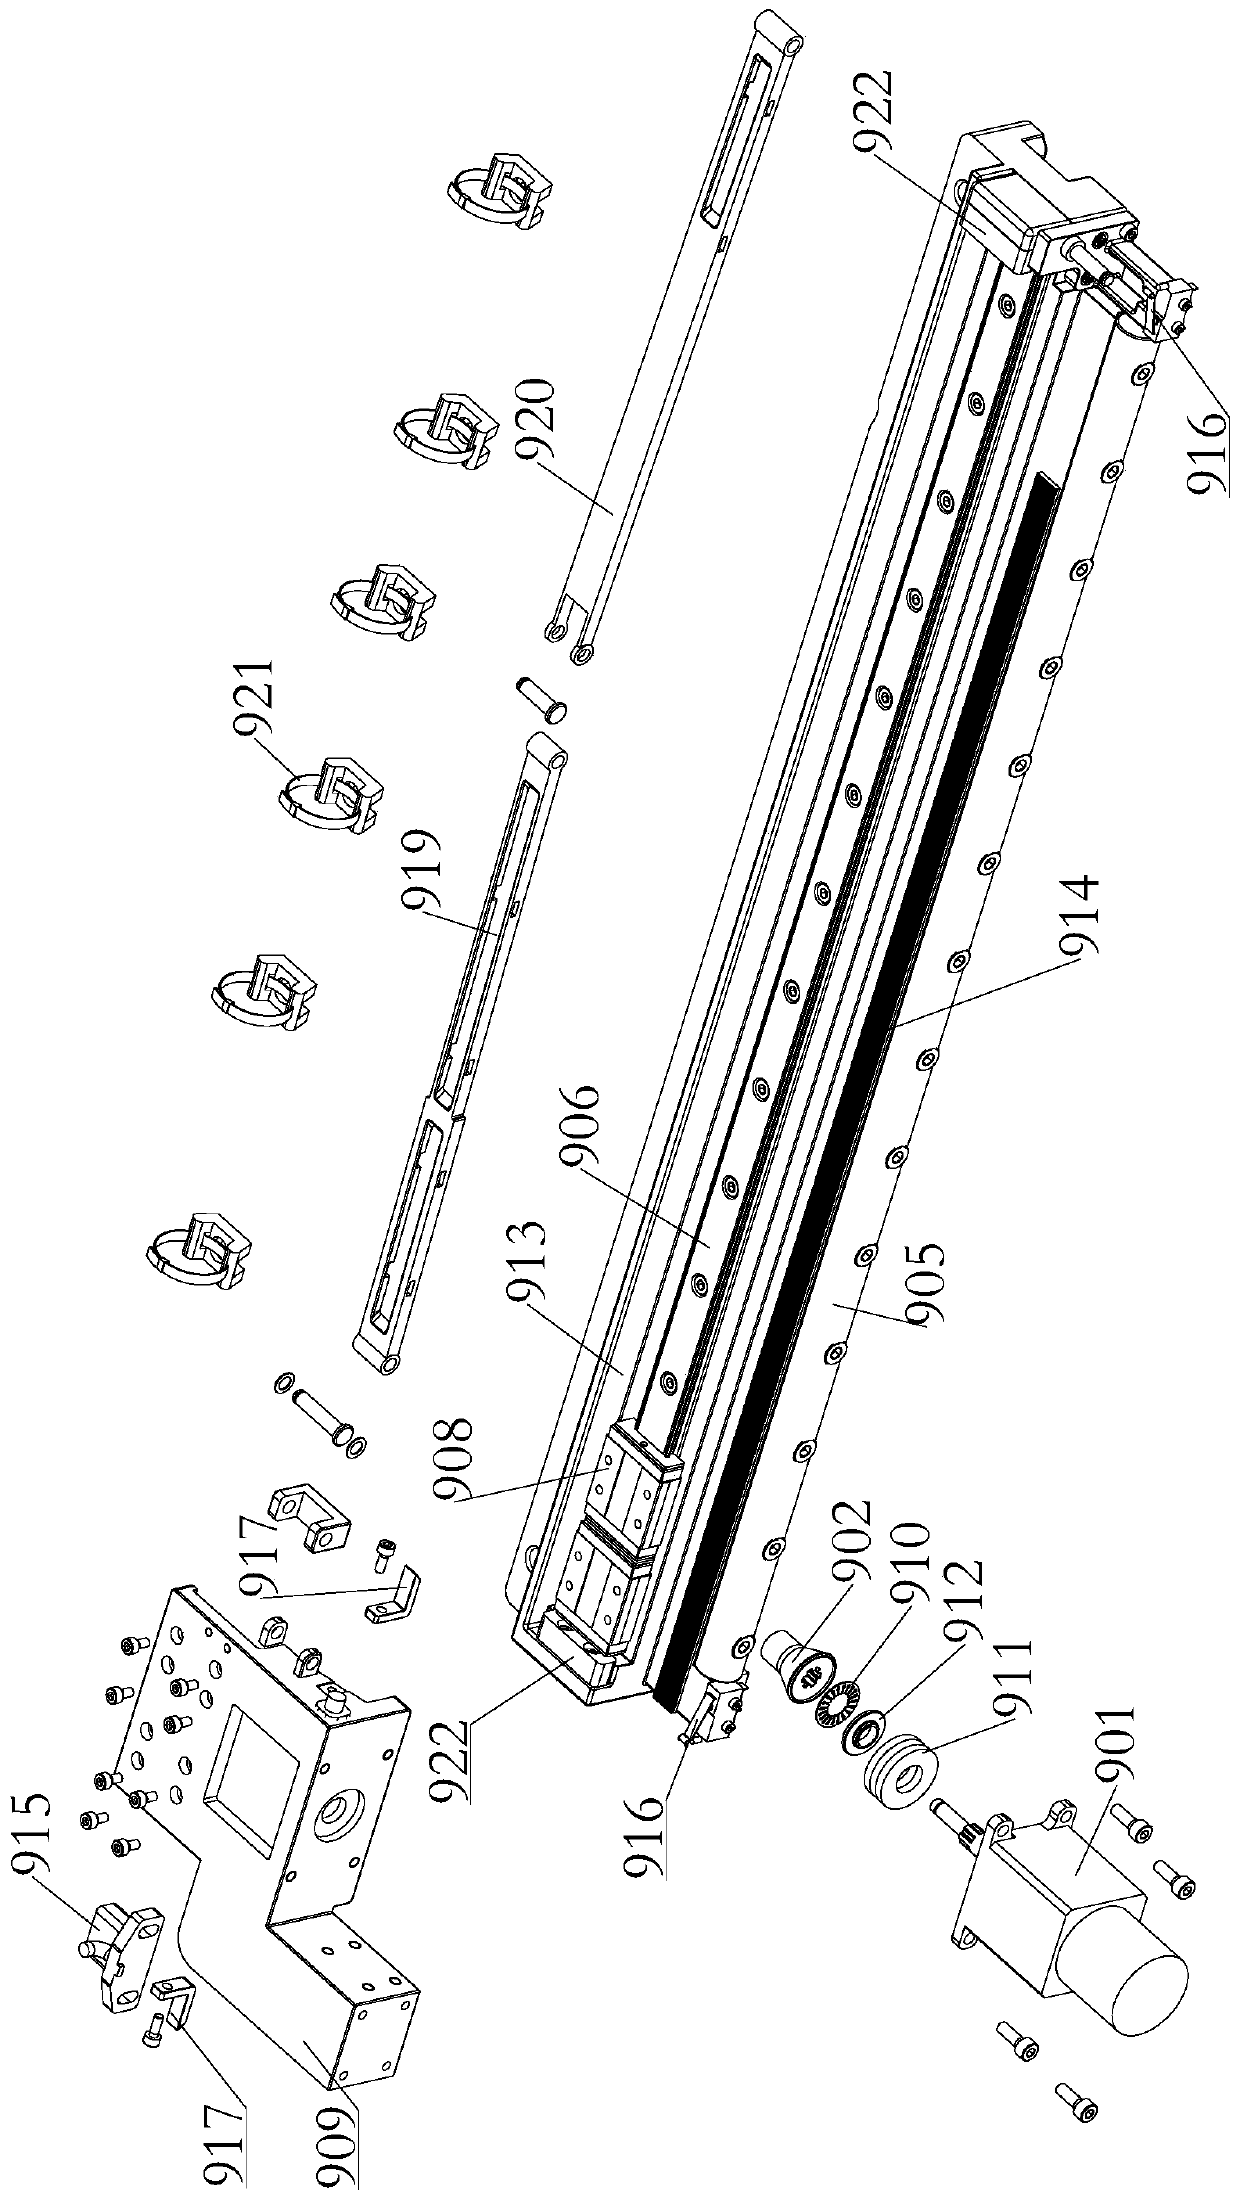 Driving device for optical inspection outside material cabin and exposure platform